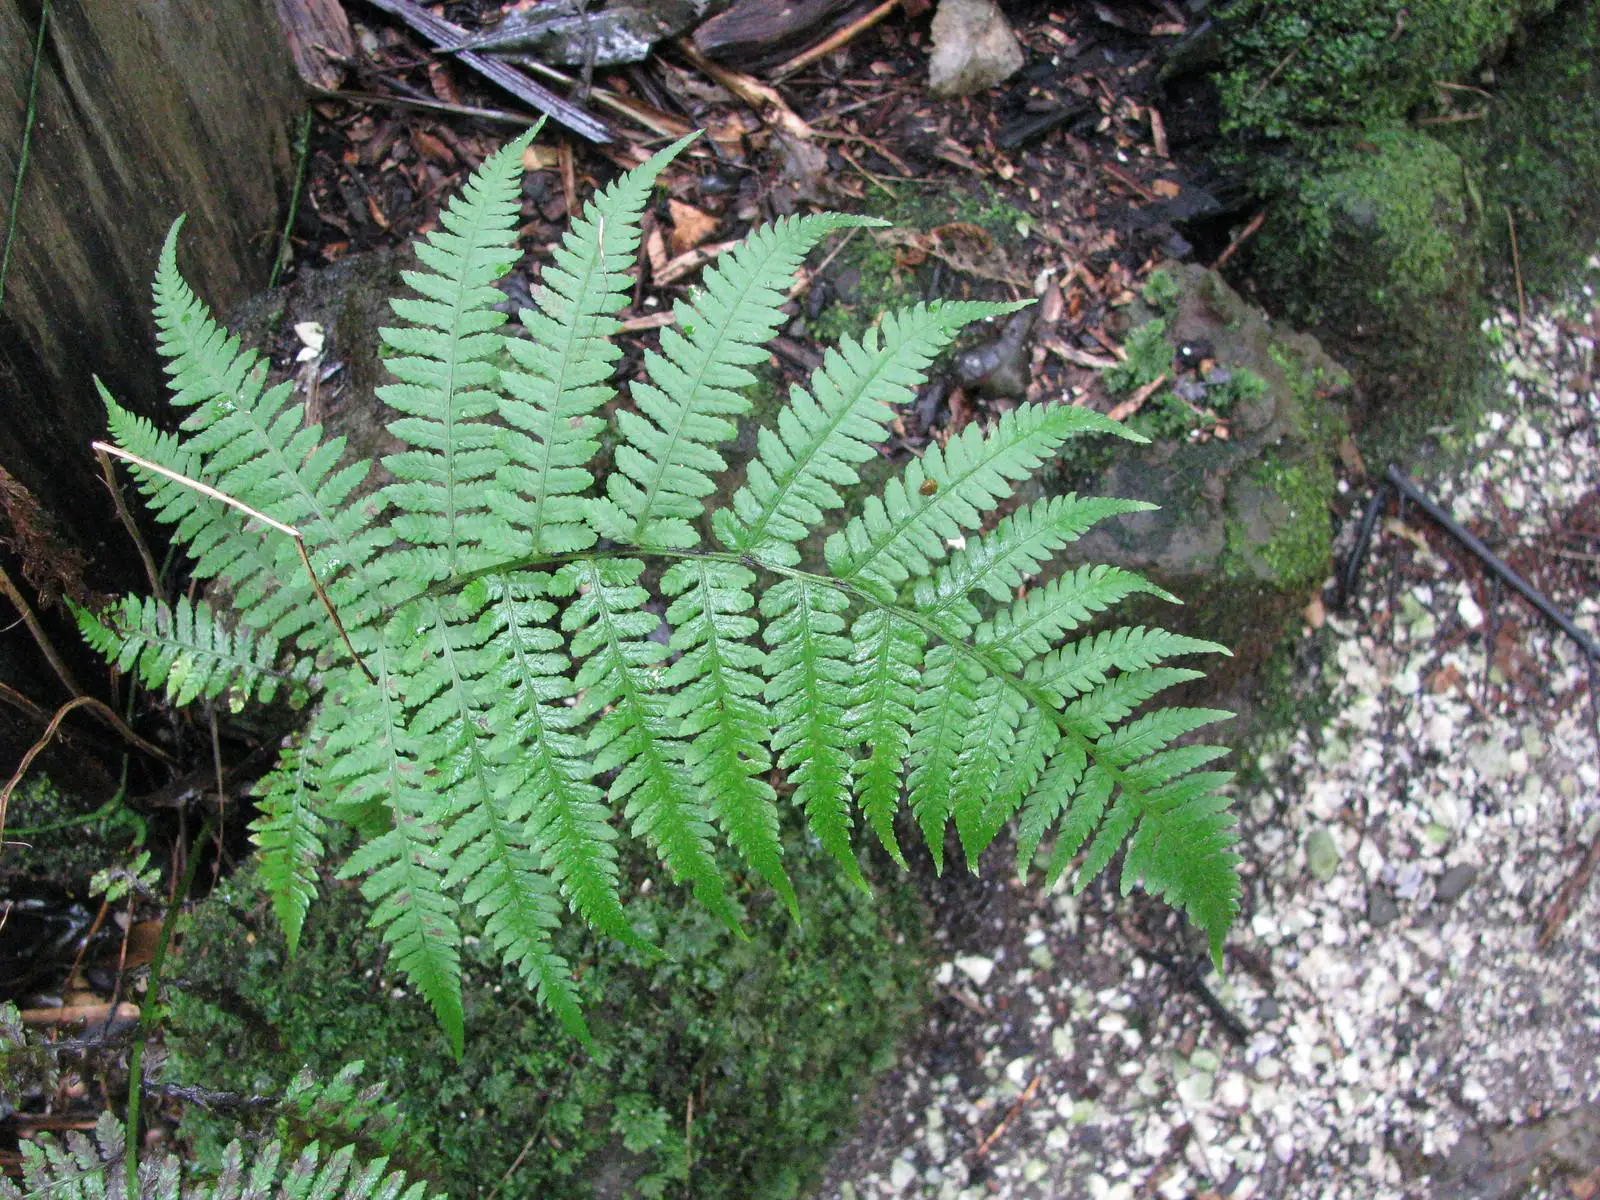 A single fern leaf growing at the base of a tree